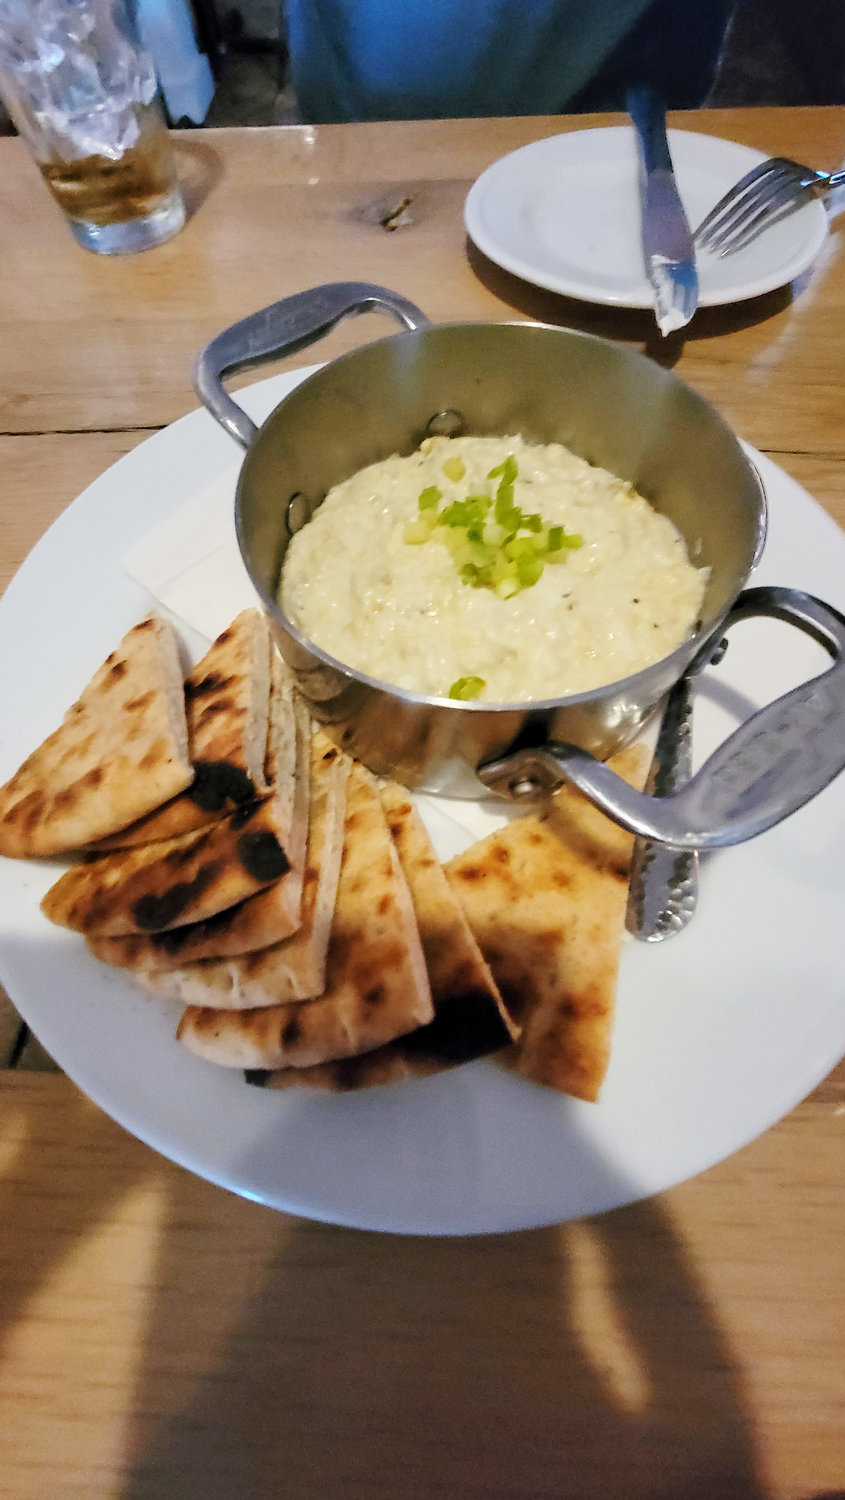 The warm artichoke dip with house-made pita chips is a simple dish done right.